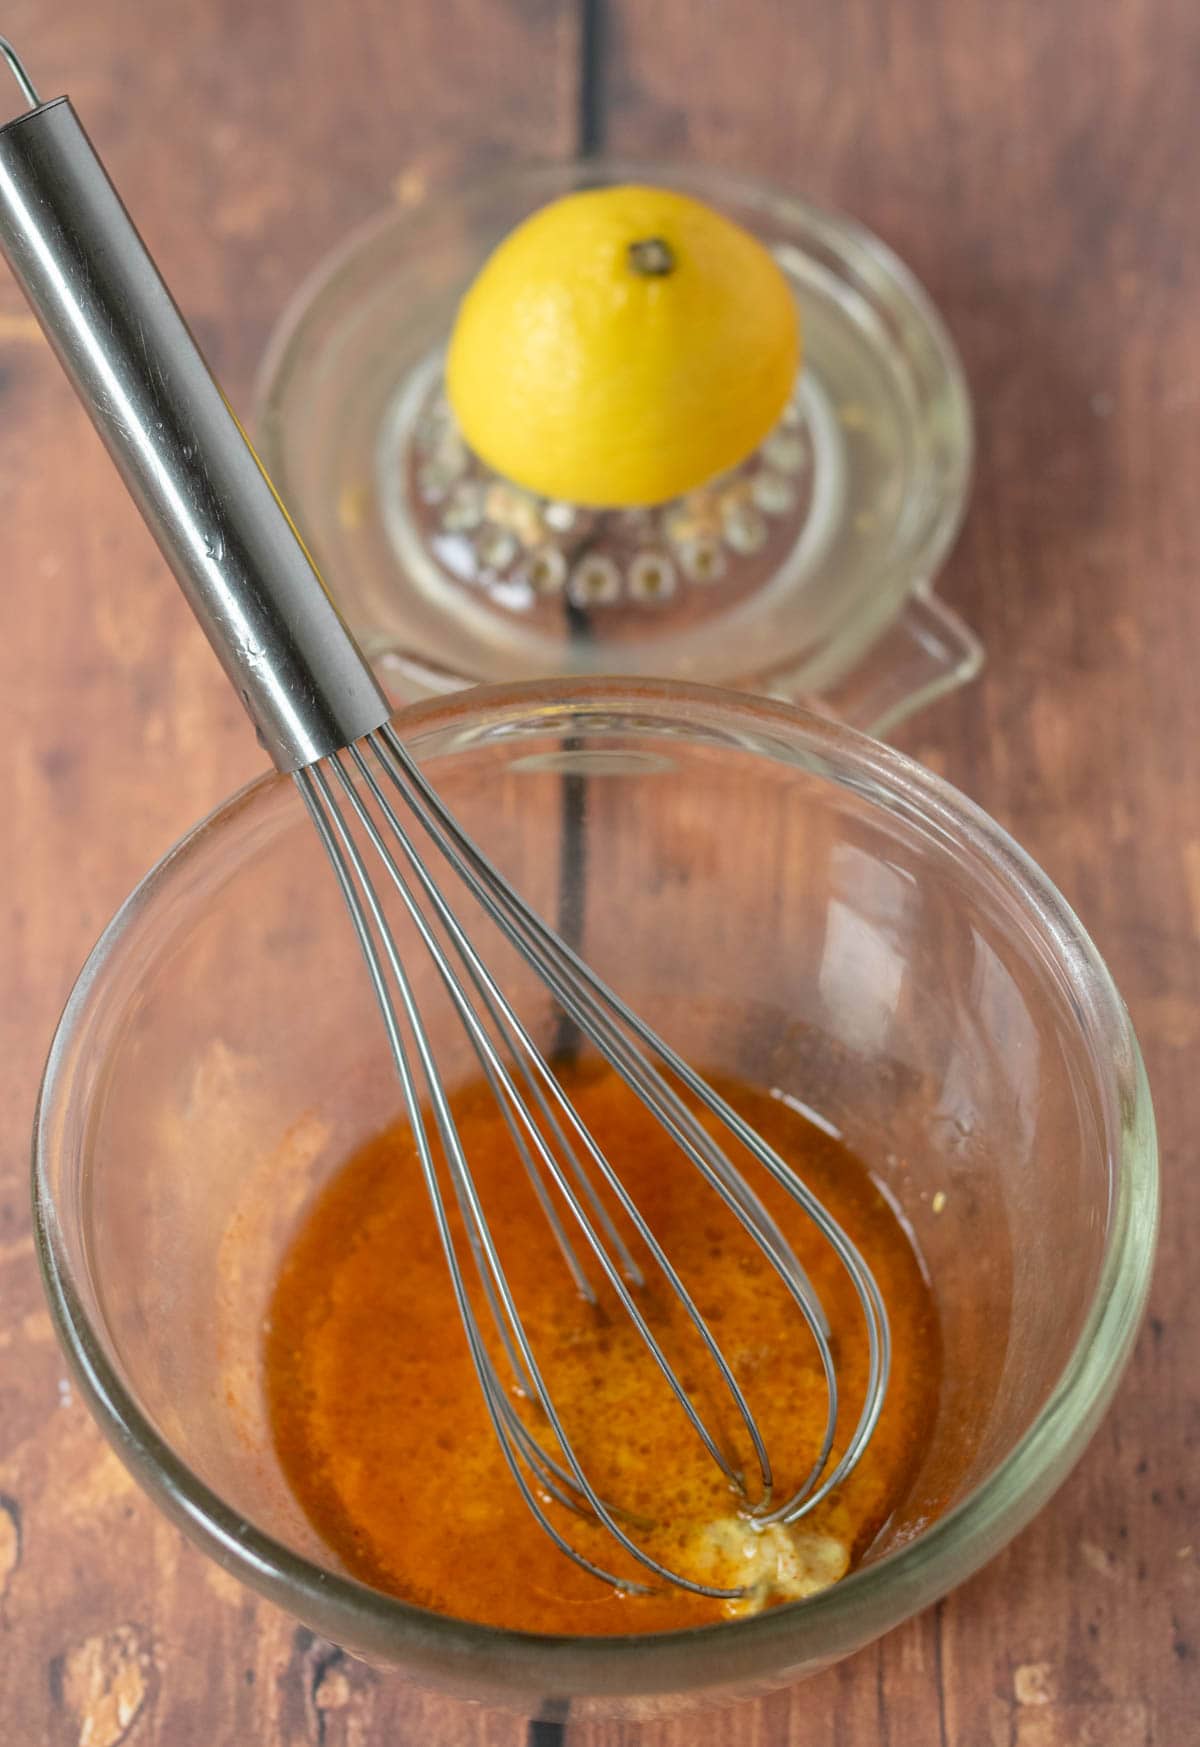 Whisk in bowl with dressing ingredients and lemon juicer in the background.